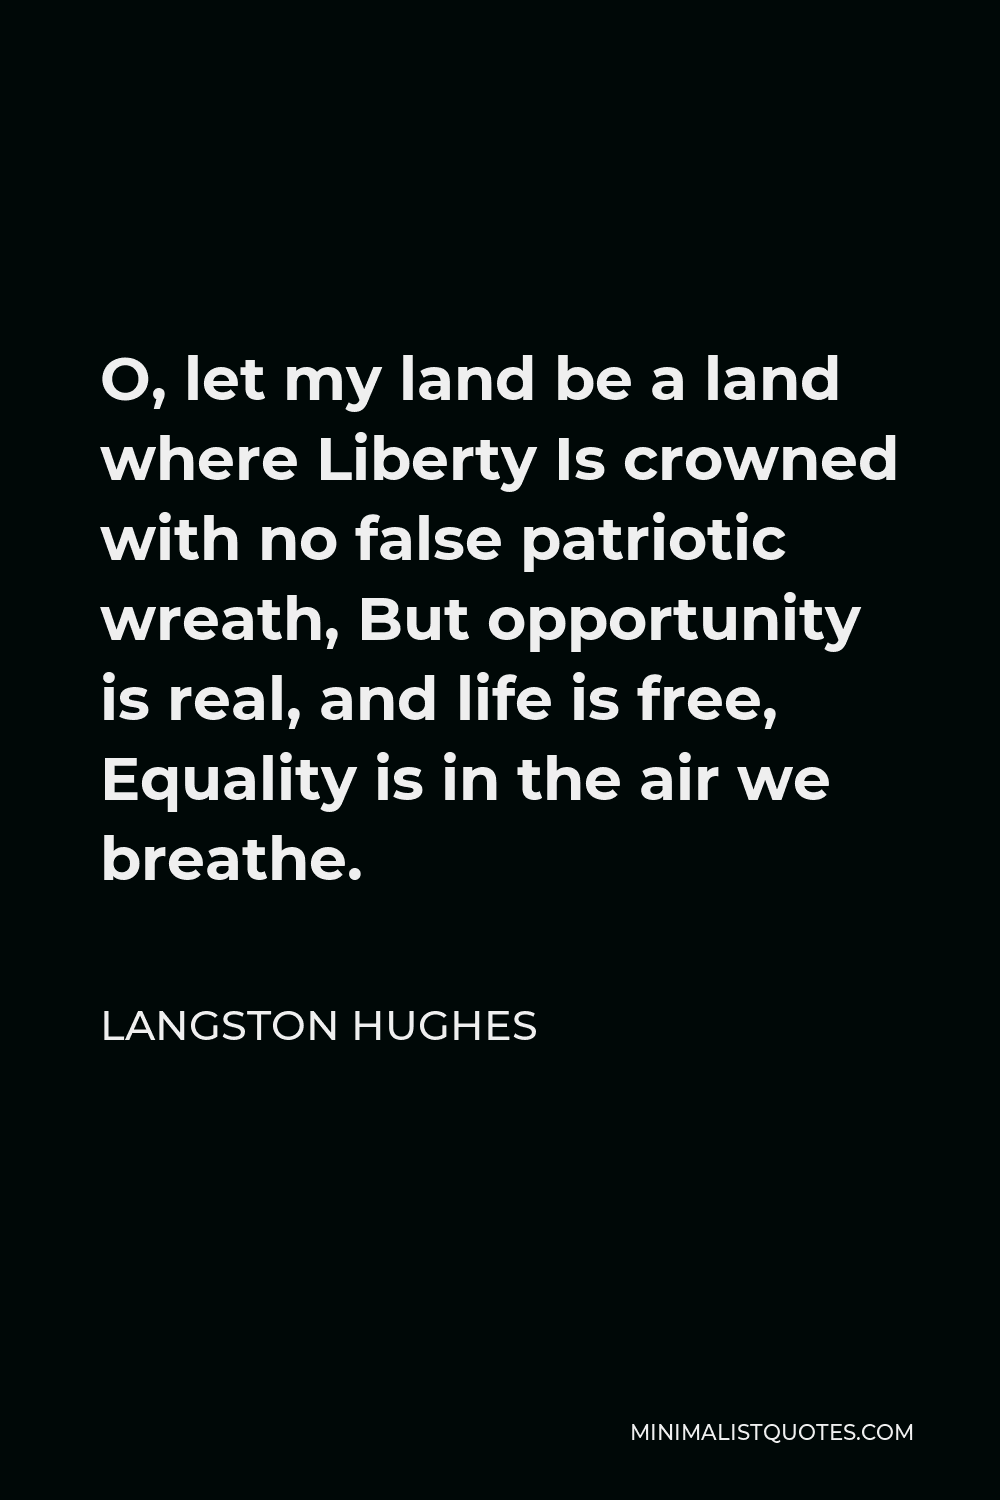 Langston Hughes Quote - O, let my land be a land where Liberty Is crowned with no false patriotic wreath, But opportunity is real, and life is free, Equality is in the air we breathe.